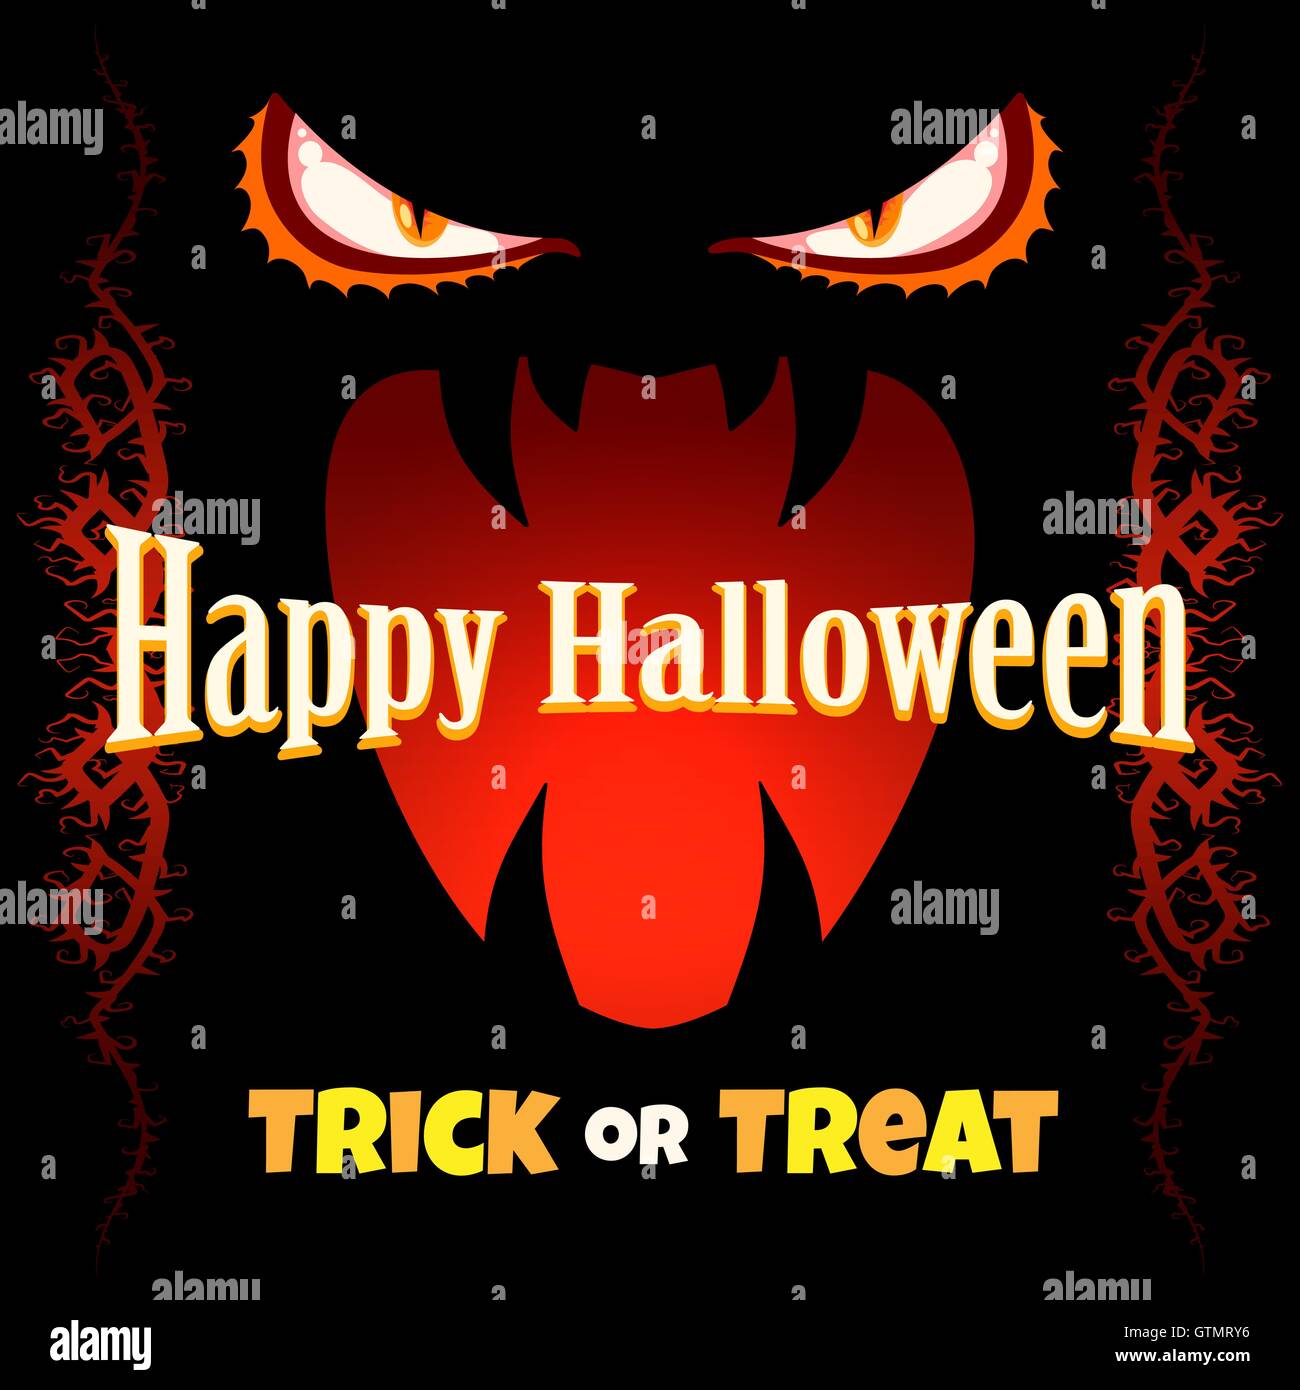 Happy Halloween Poster or Invitation Card. Monster Eyes and Scary Open Mouth with lettering Trick or treat. Vector Illustration. Stock Vector